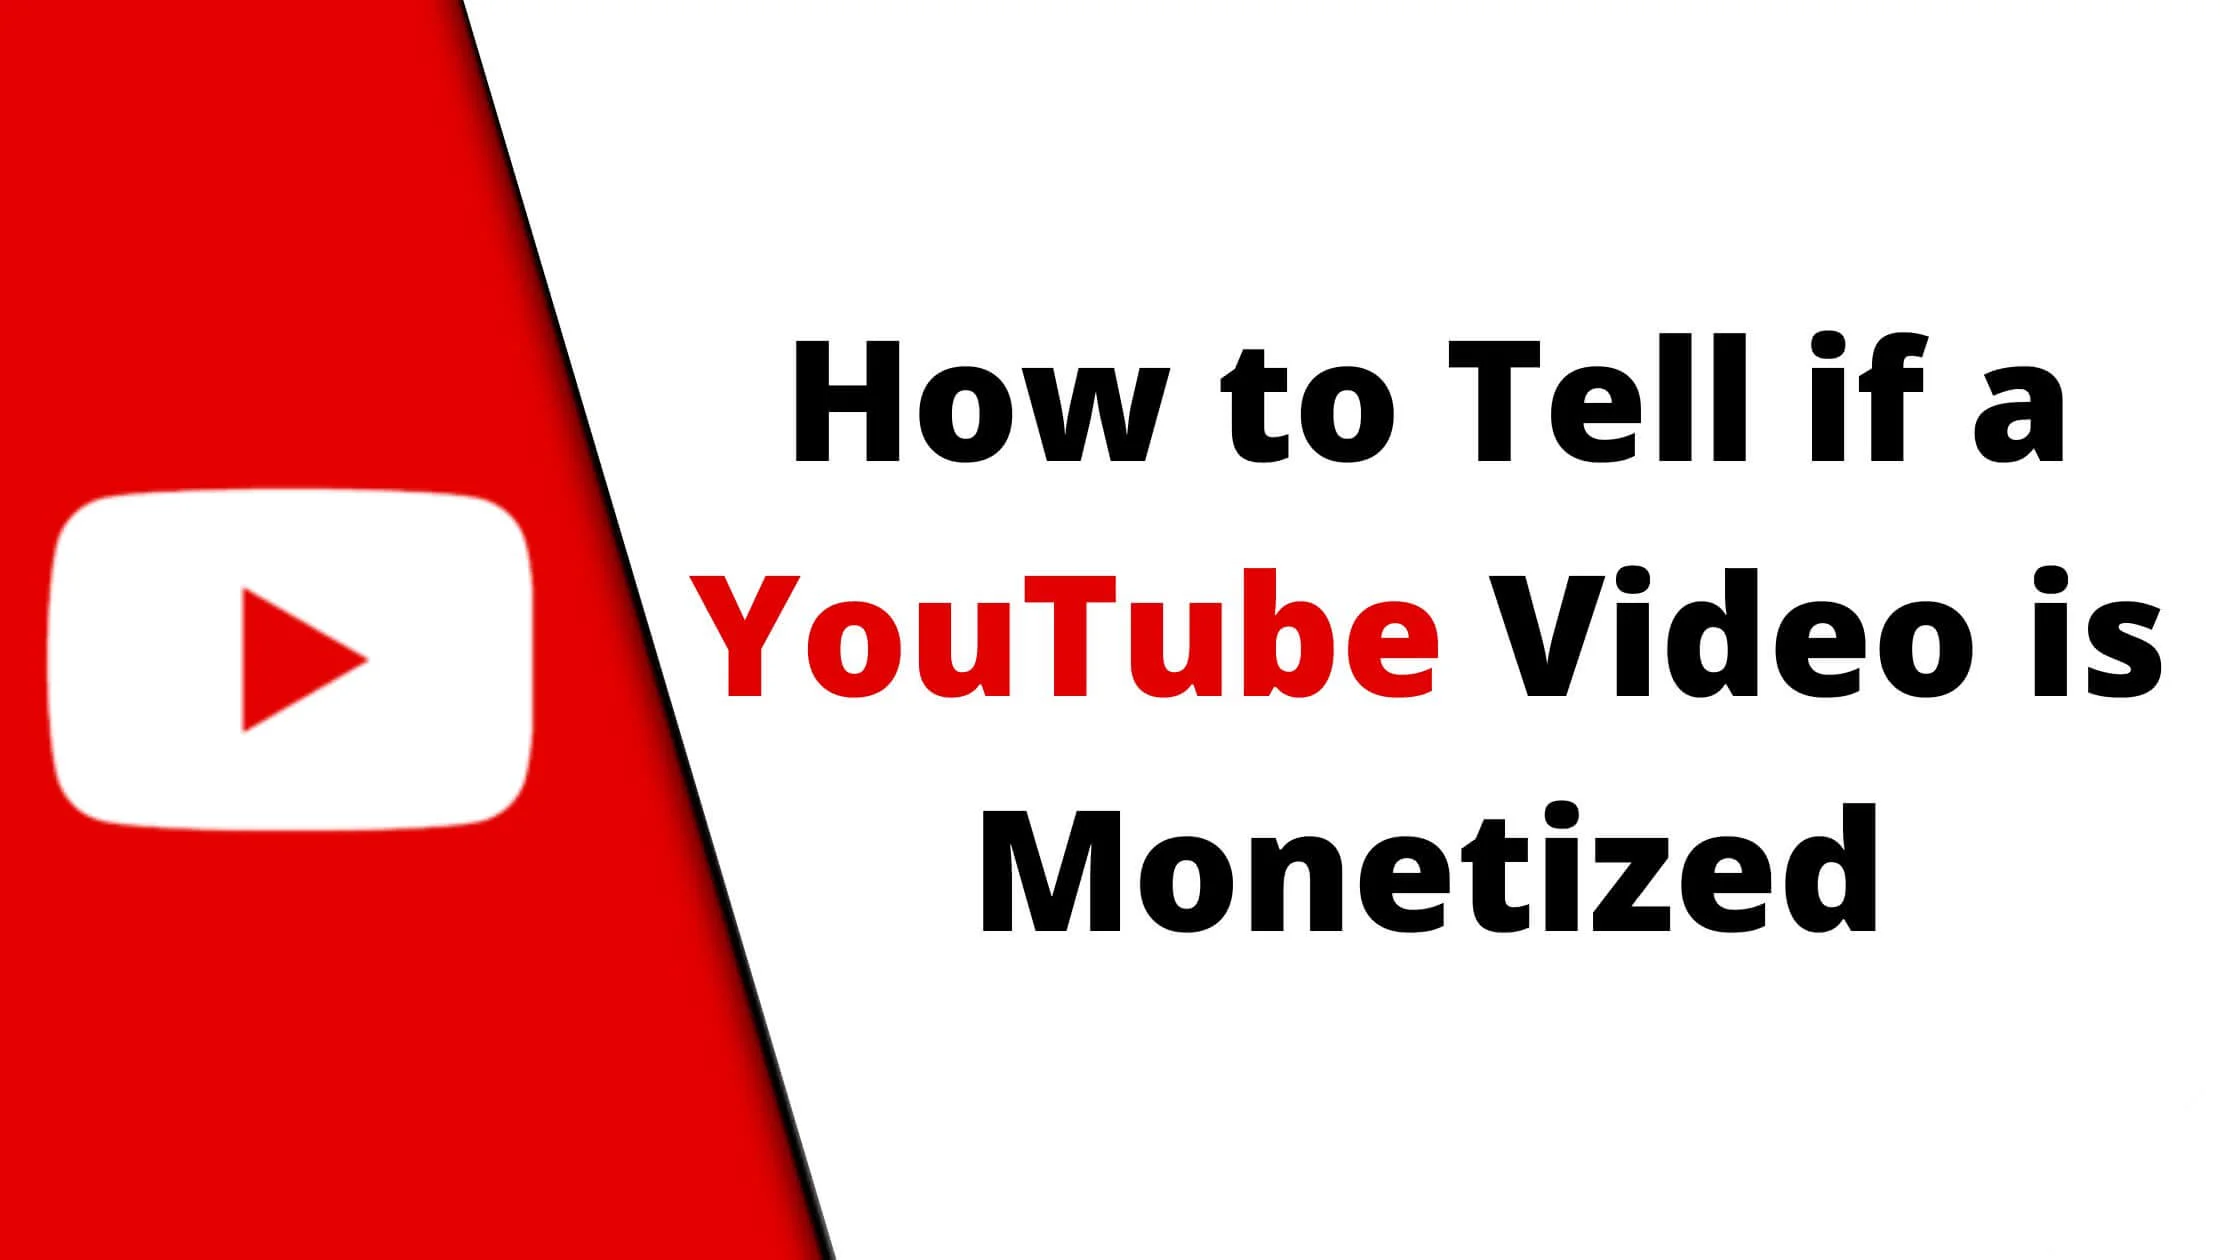 How to Tell if a Youtube Video is Monetized